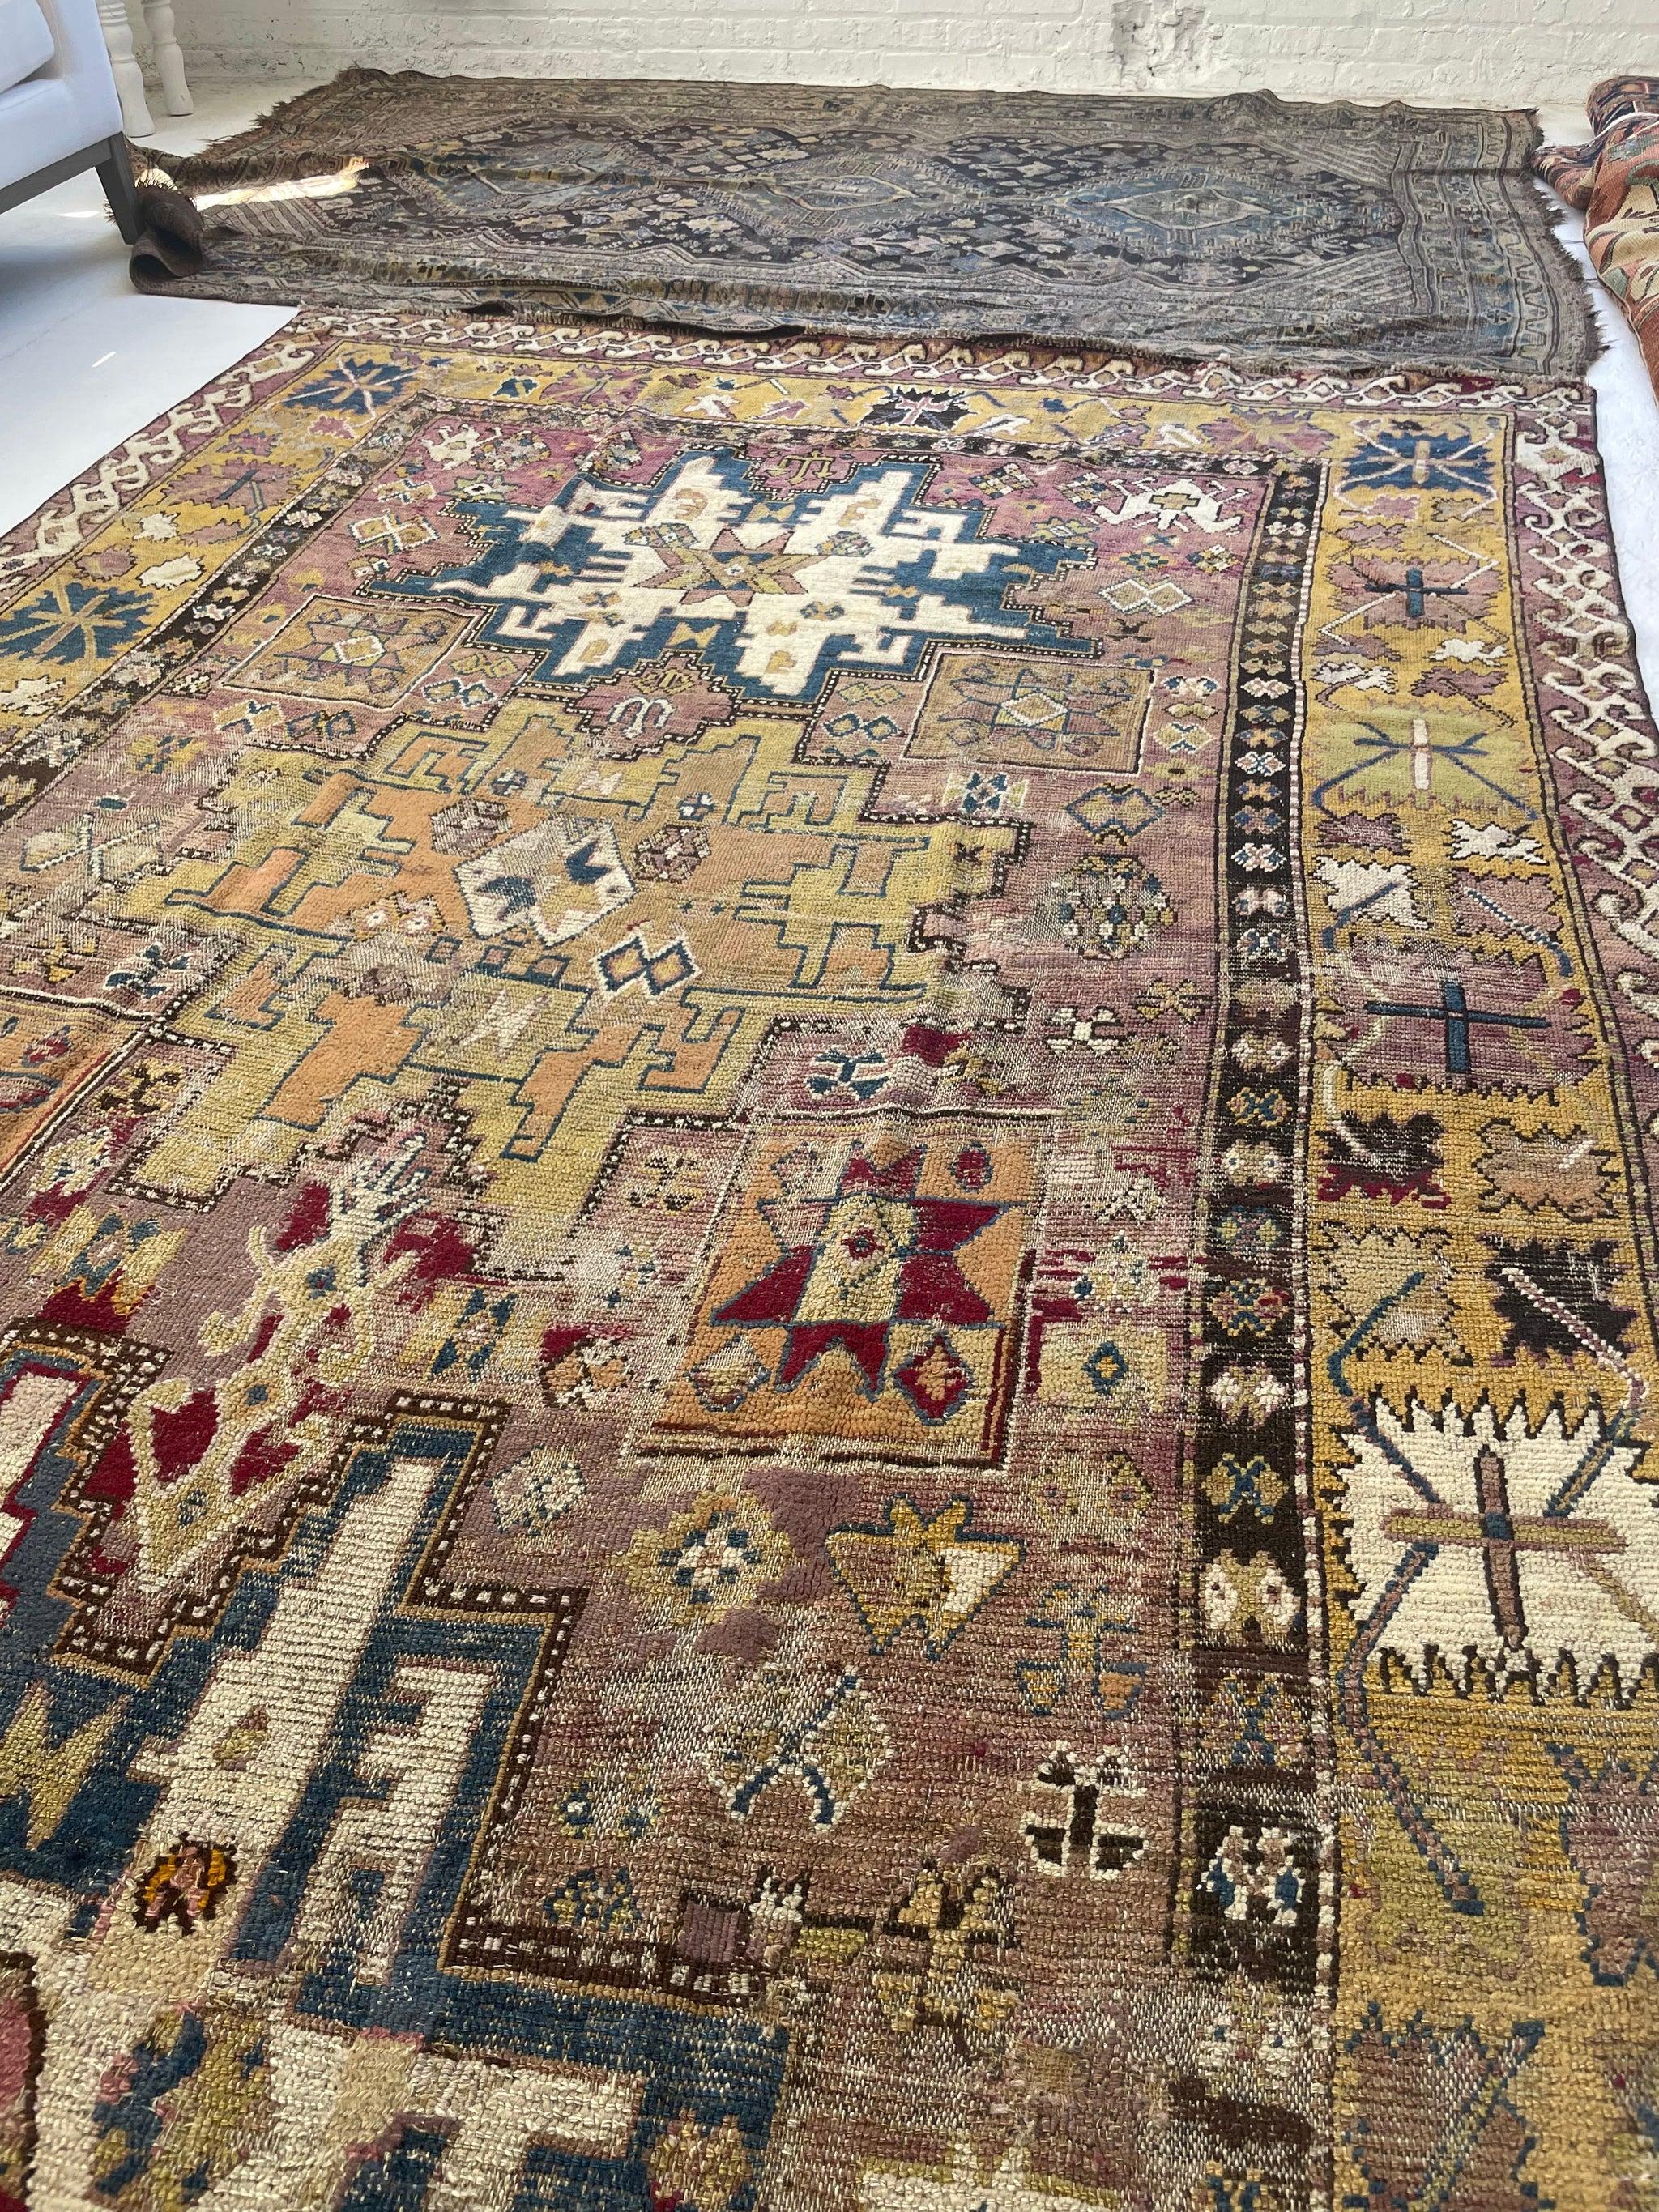 Antique Textile Rug with Lavender, Sunflower Yellows, & Blues, c. 1900 For Sale 5